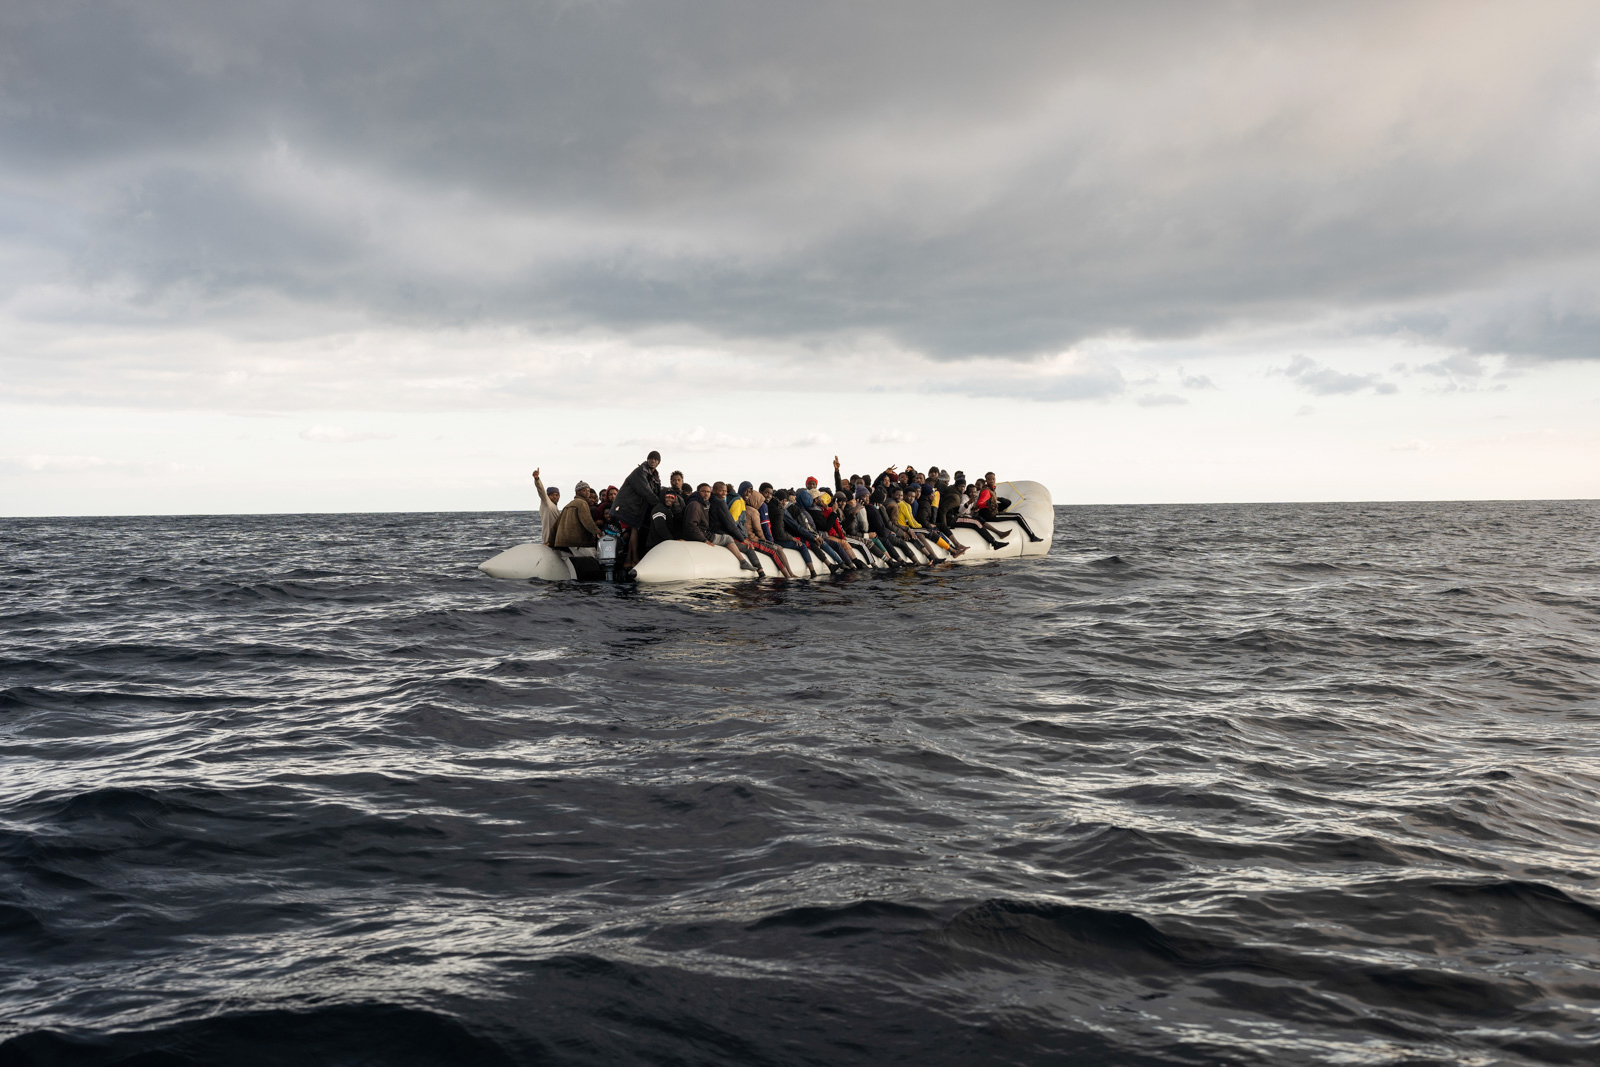 Some of the 156 people rescued from two boats in distress by NGO Emergency during an operation in February 2023. Photo by Giulio Piscitelli